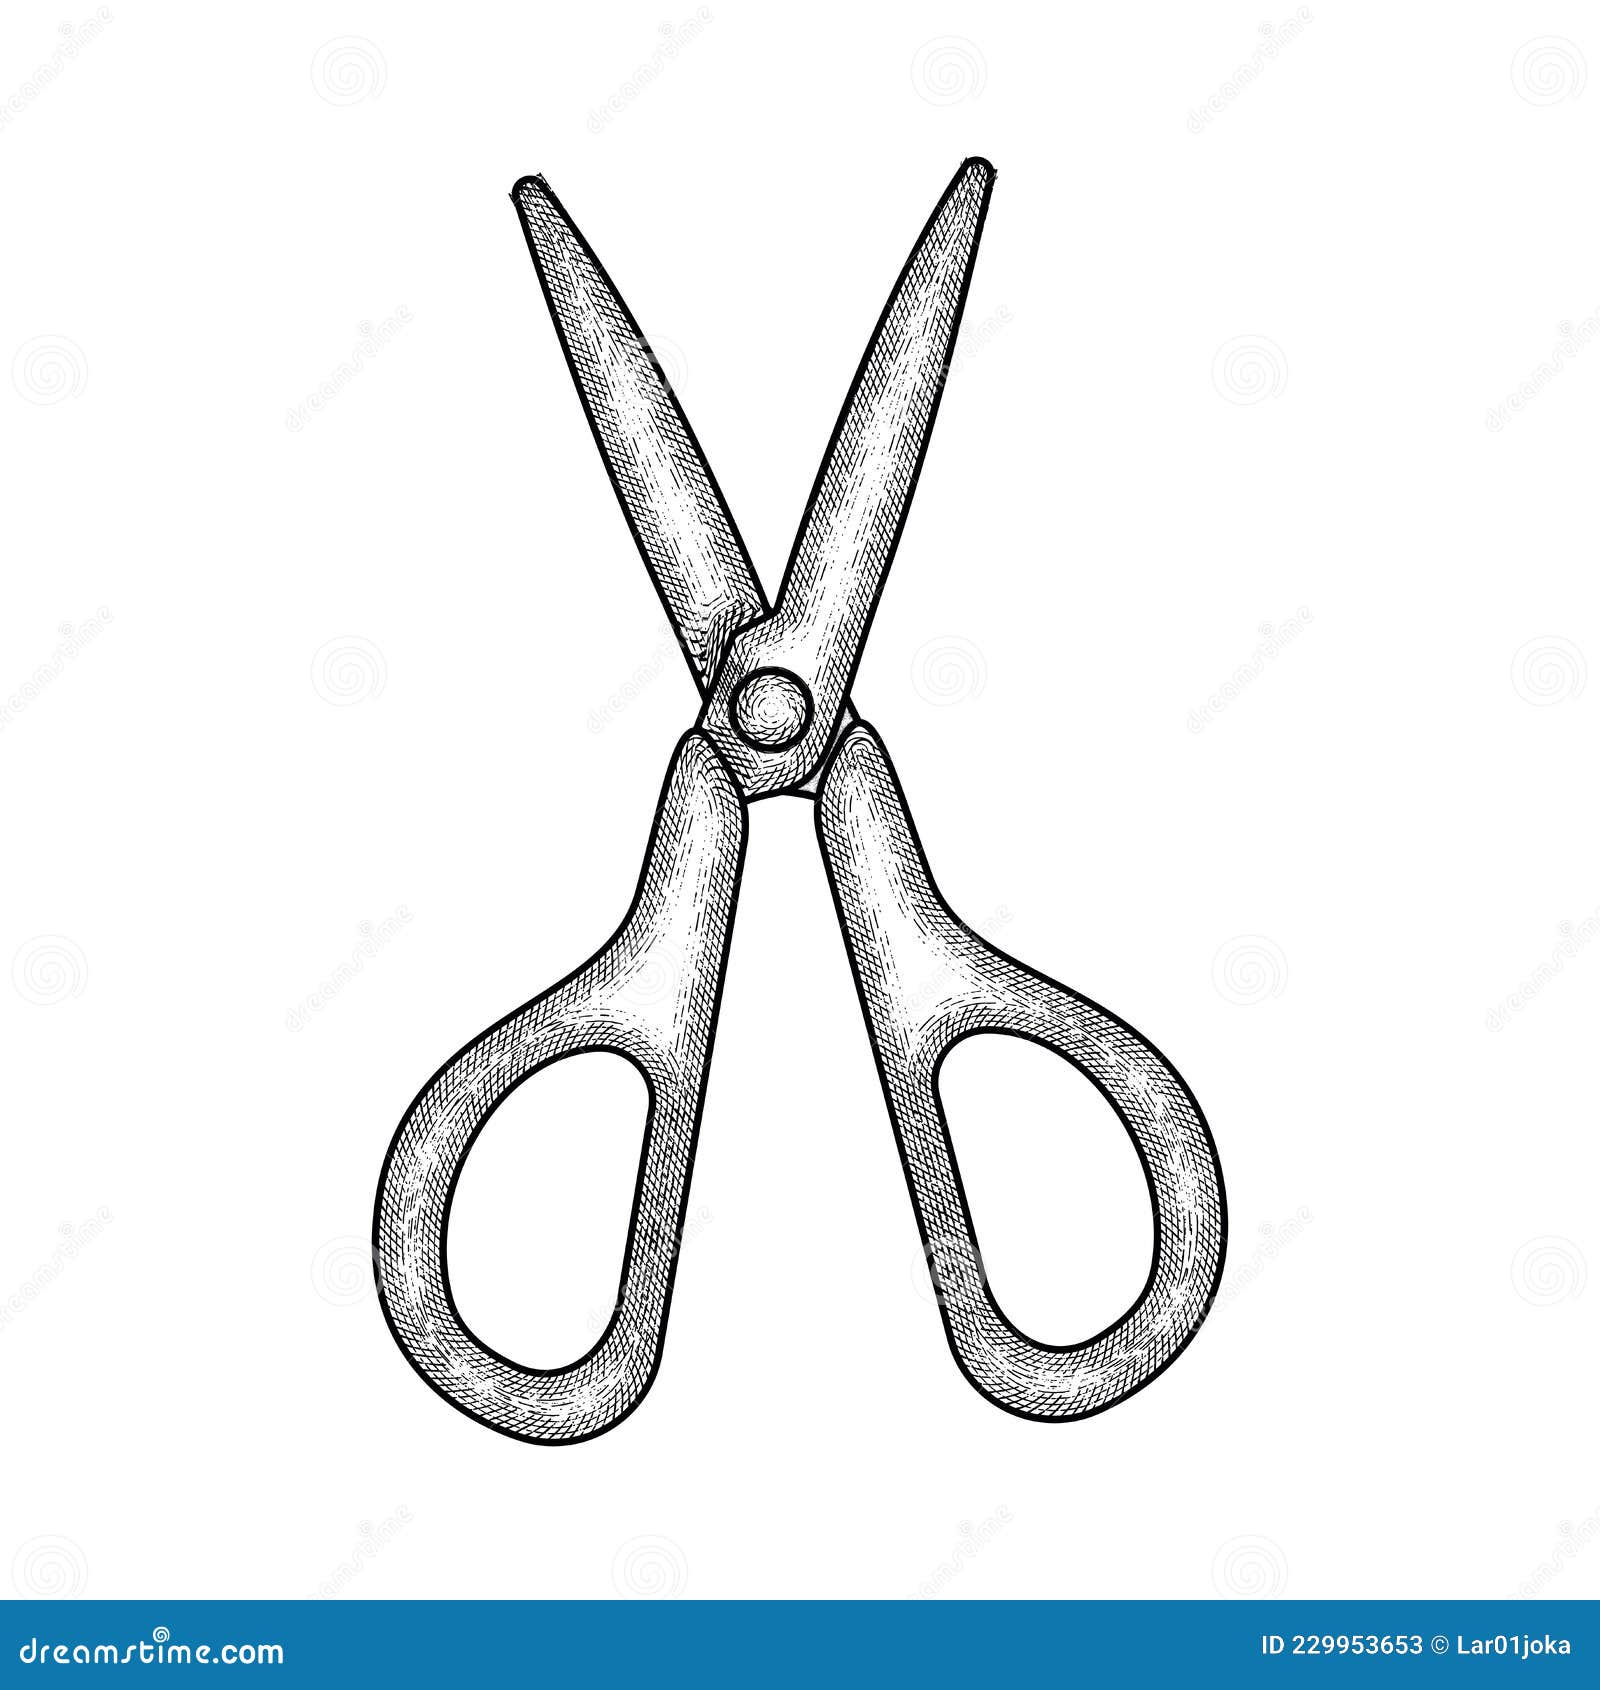 https://thumbs.dreamstime.com/z/isolated-vintage-sketch-scissors-school-supply-icon-vector-229953653.jpg